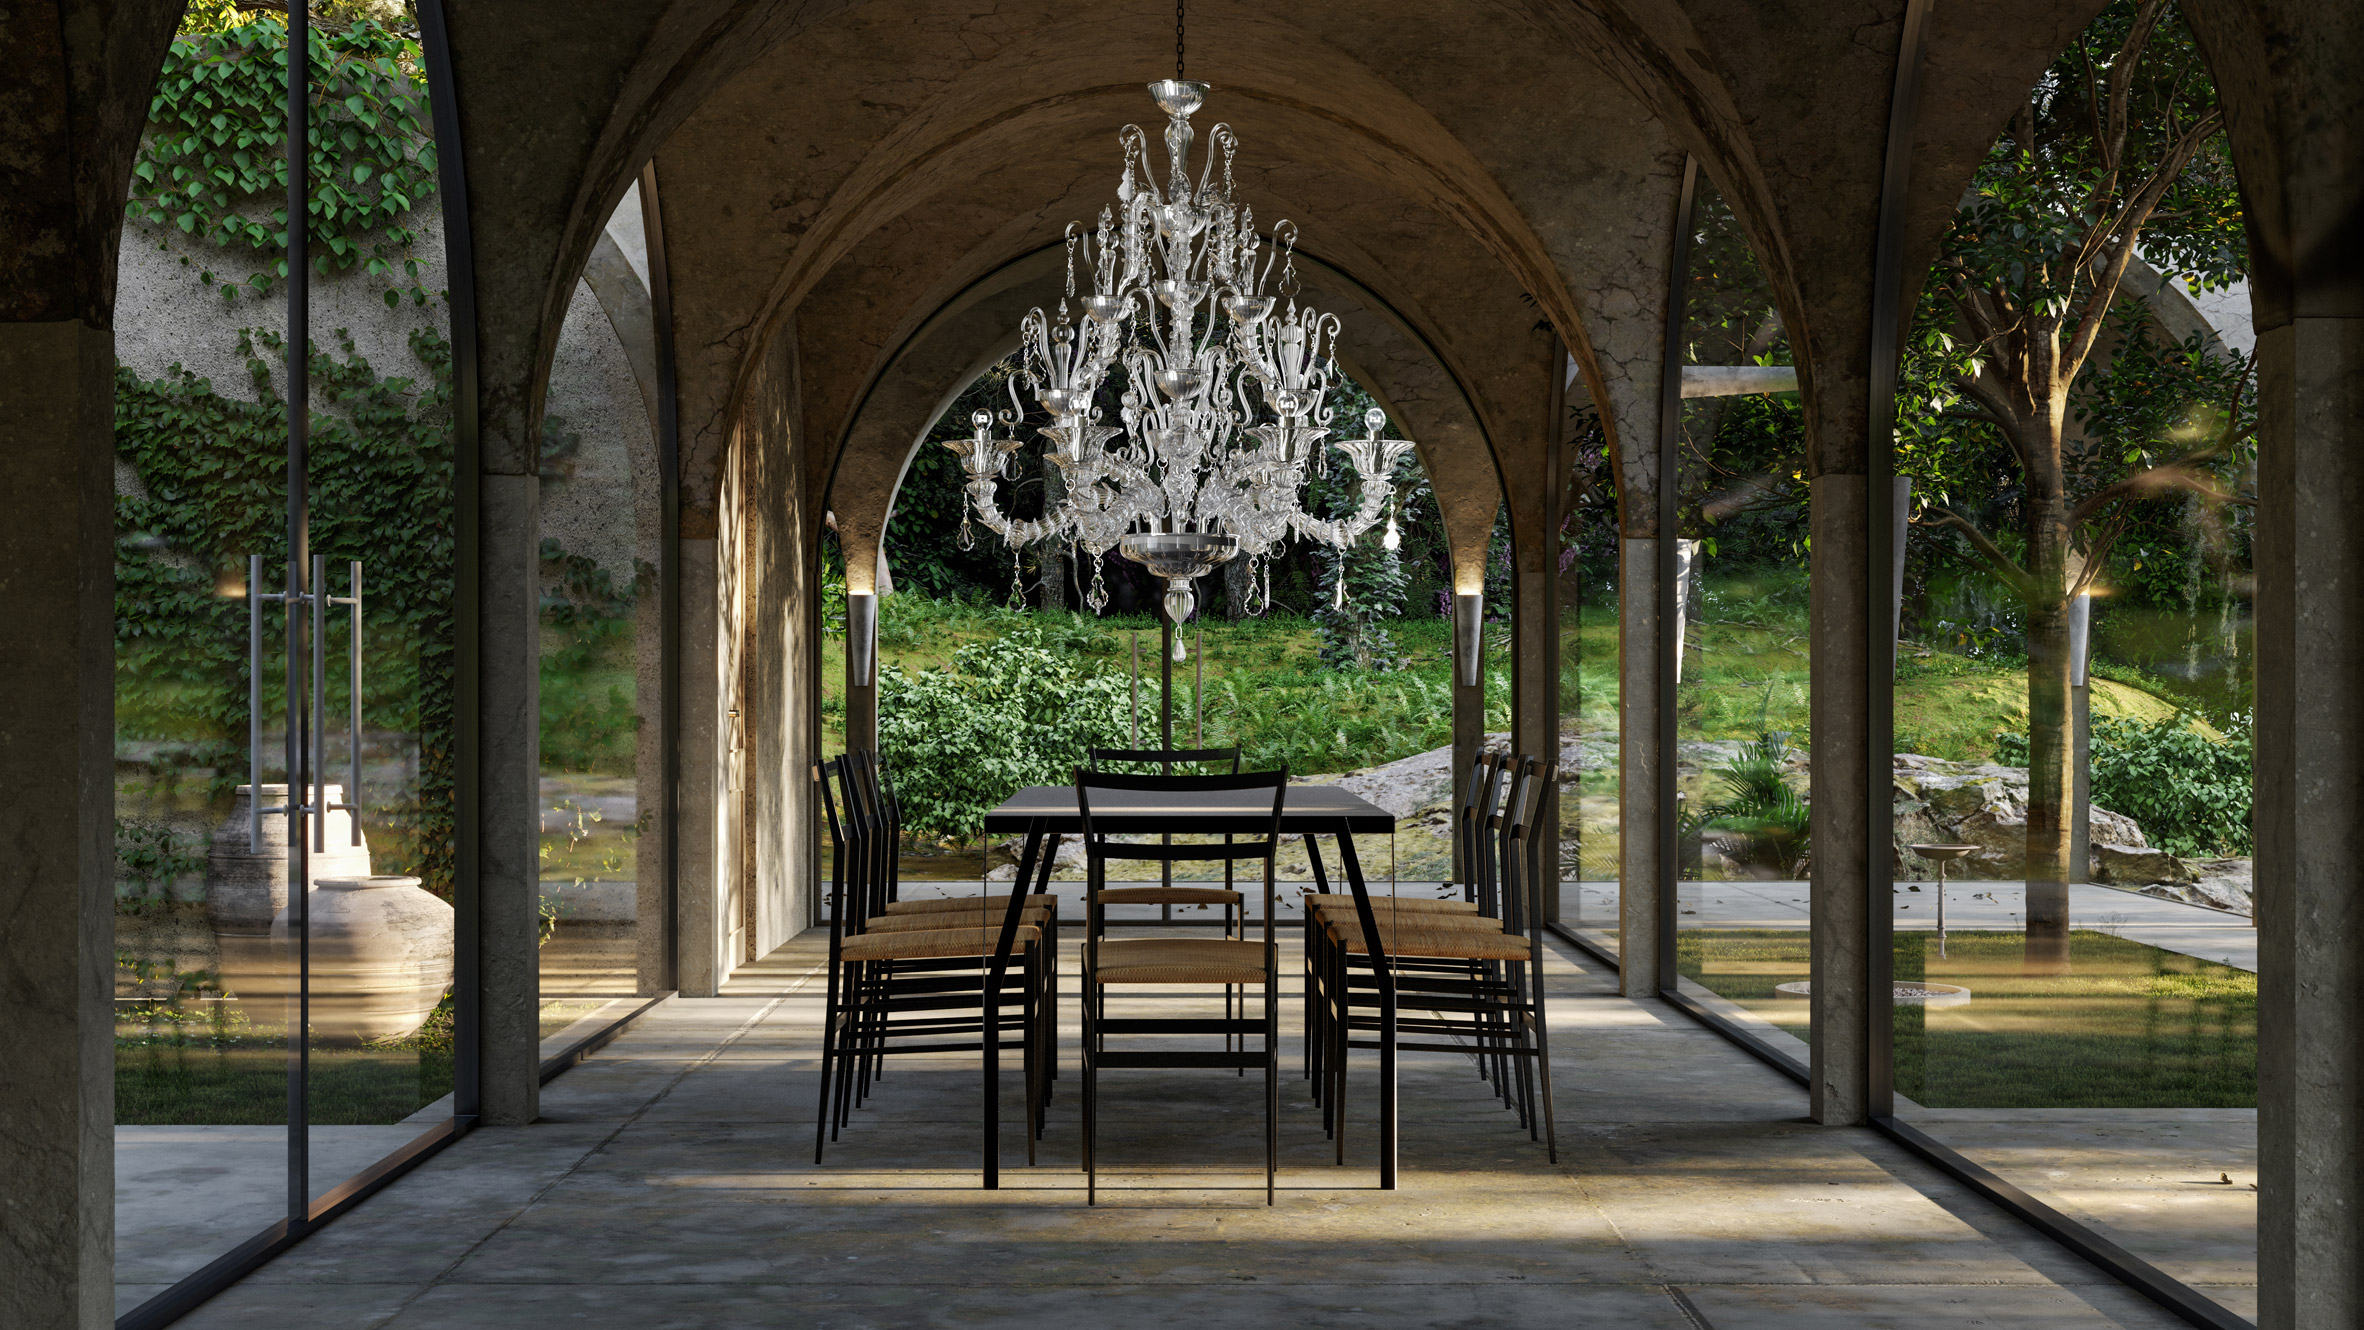 A chandelier-lit dining room designed by Marc Thorpe